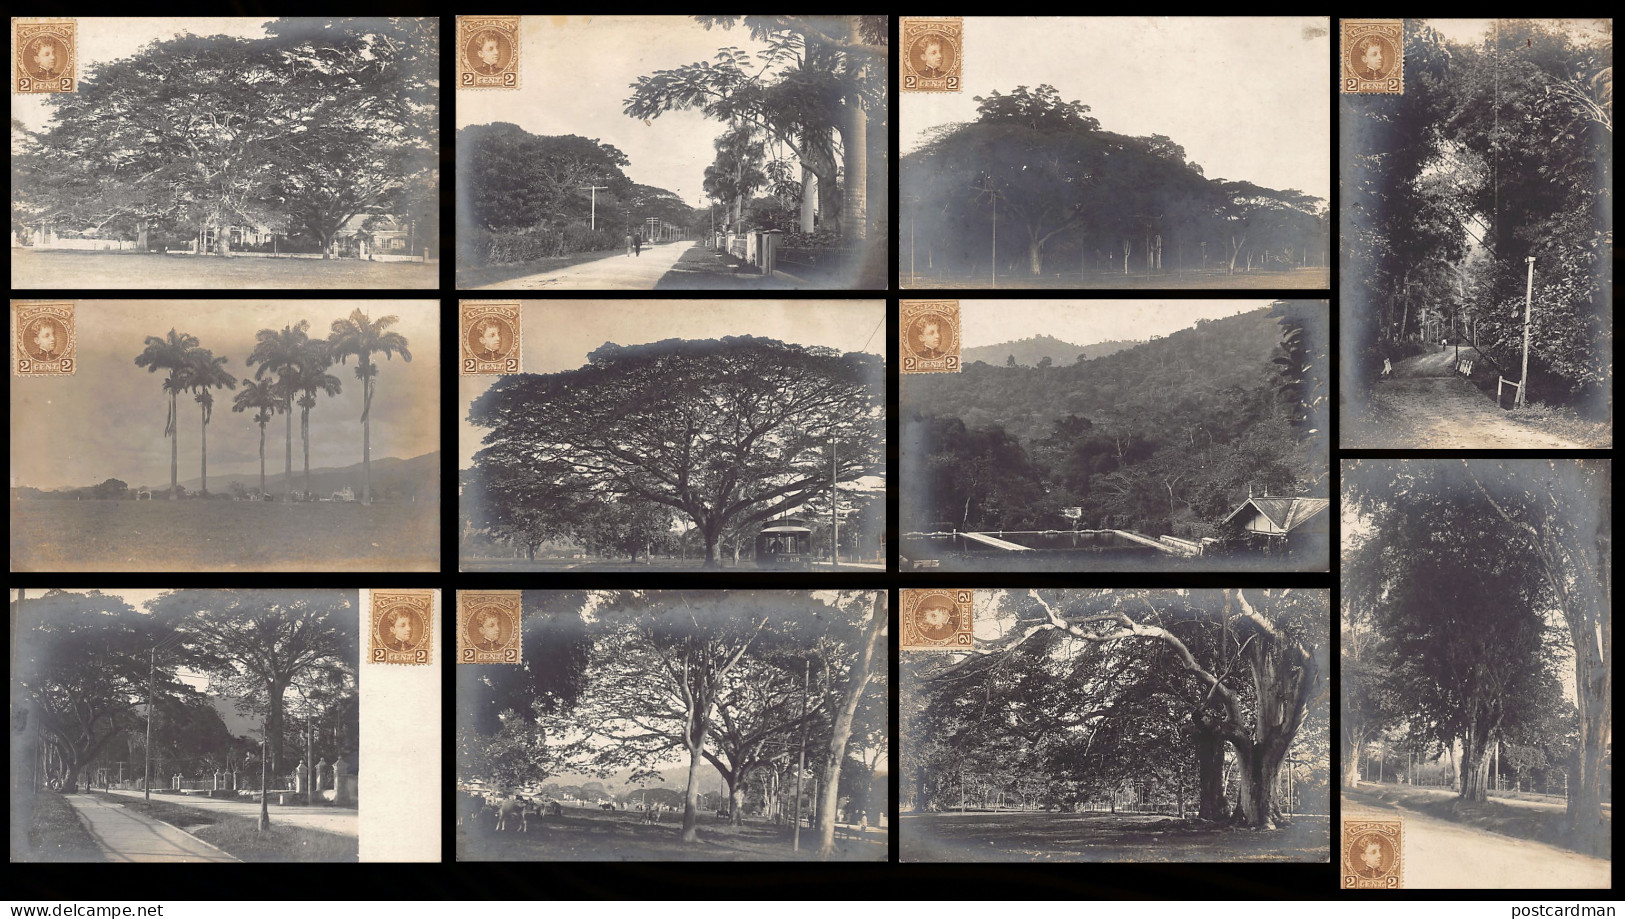 Trinidad - PORT OF SPAIN - Circular Road, The Savannah And Water Tanks - Set Of 11 Real Photo Postcards - Publ. Unknown  - Trinidad